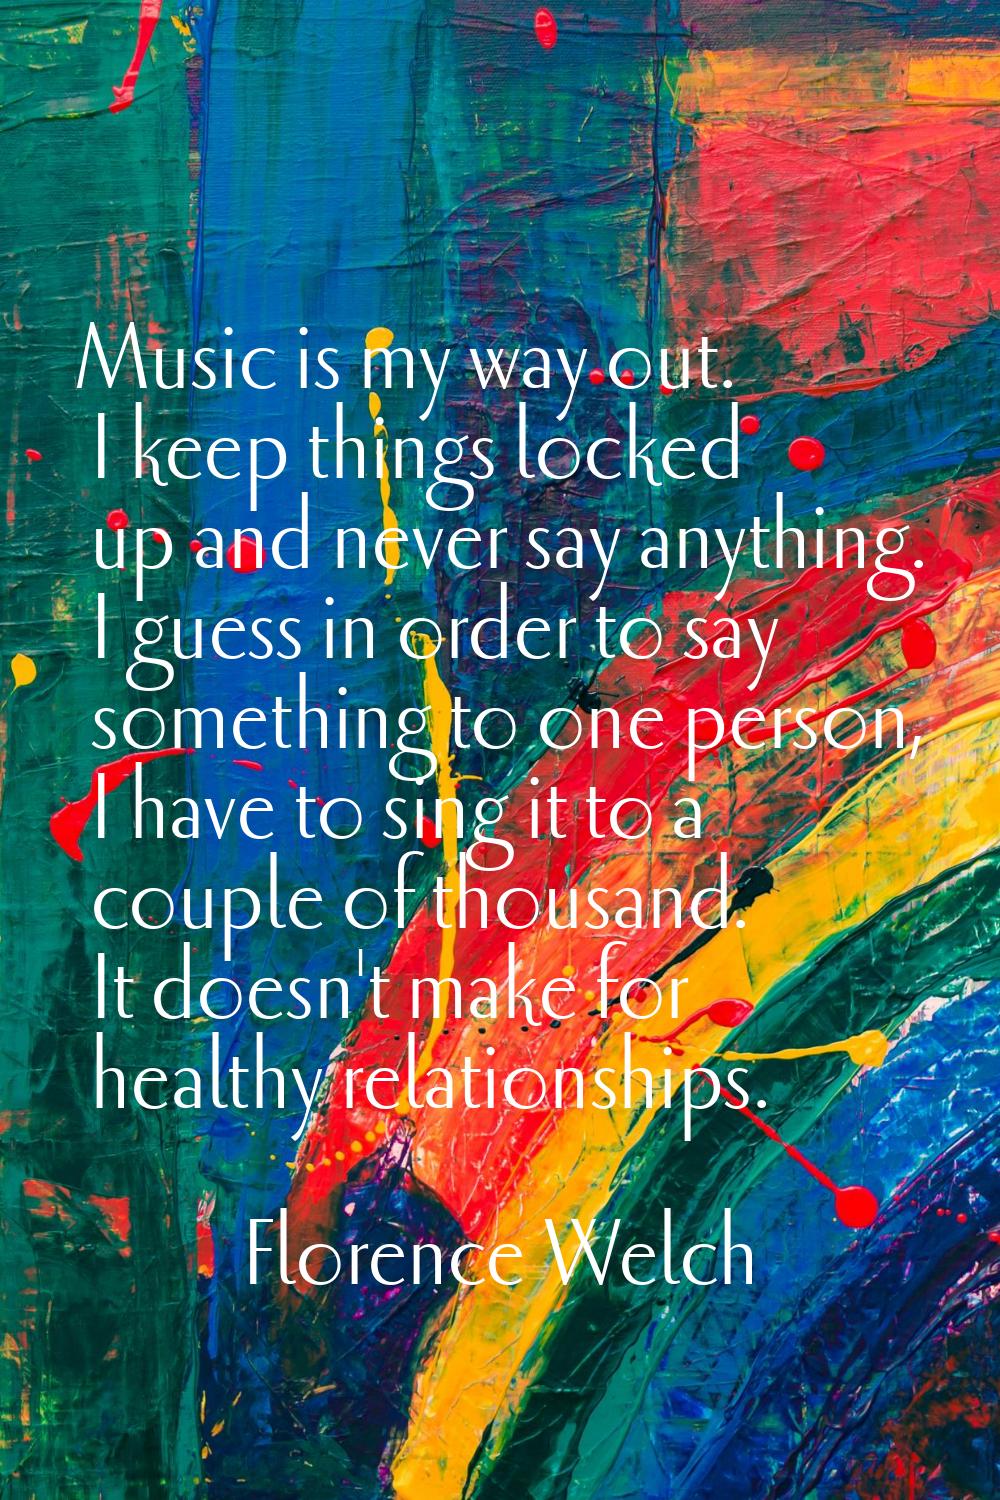 Music is my way out. I keep things locked up and never say anything. I guess in order to say someth